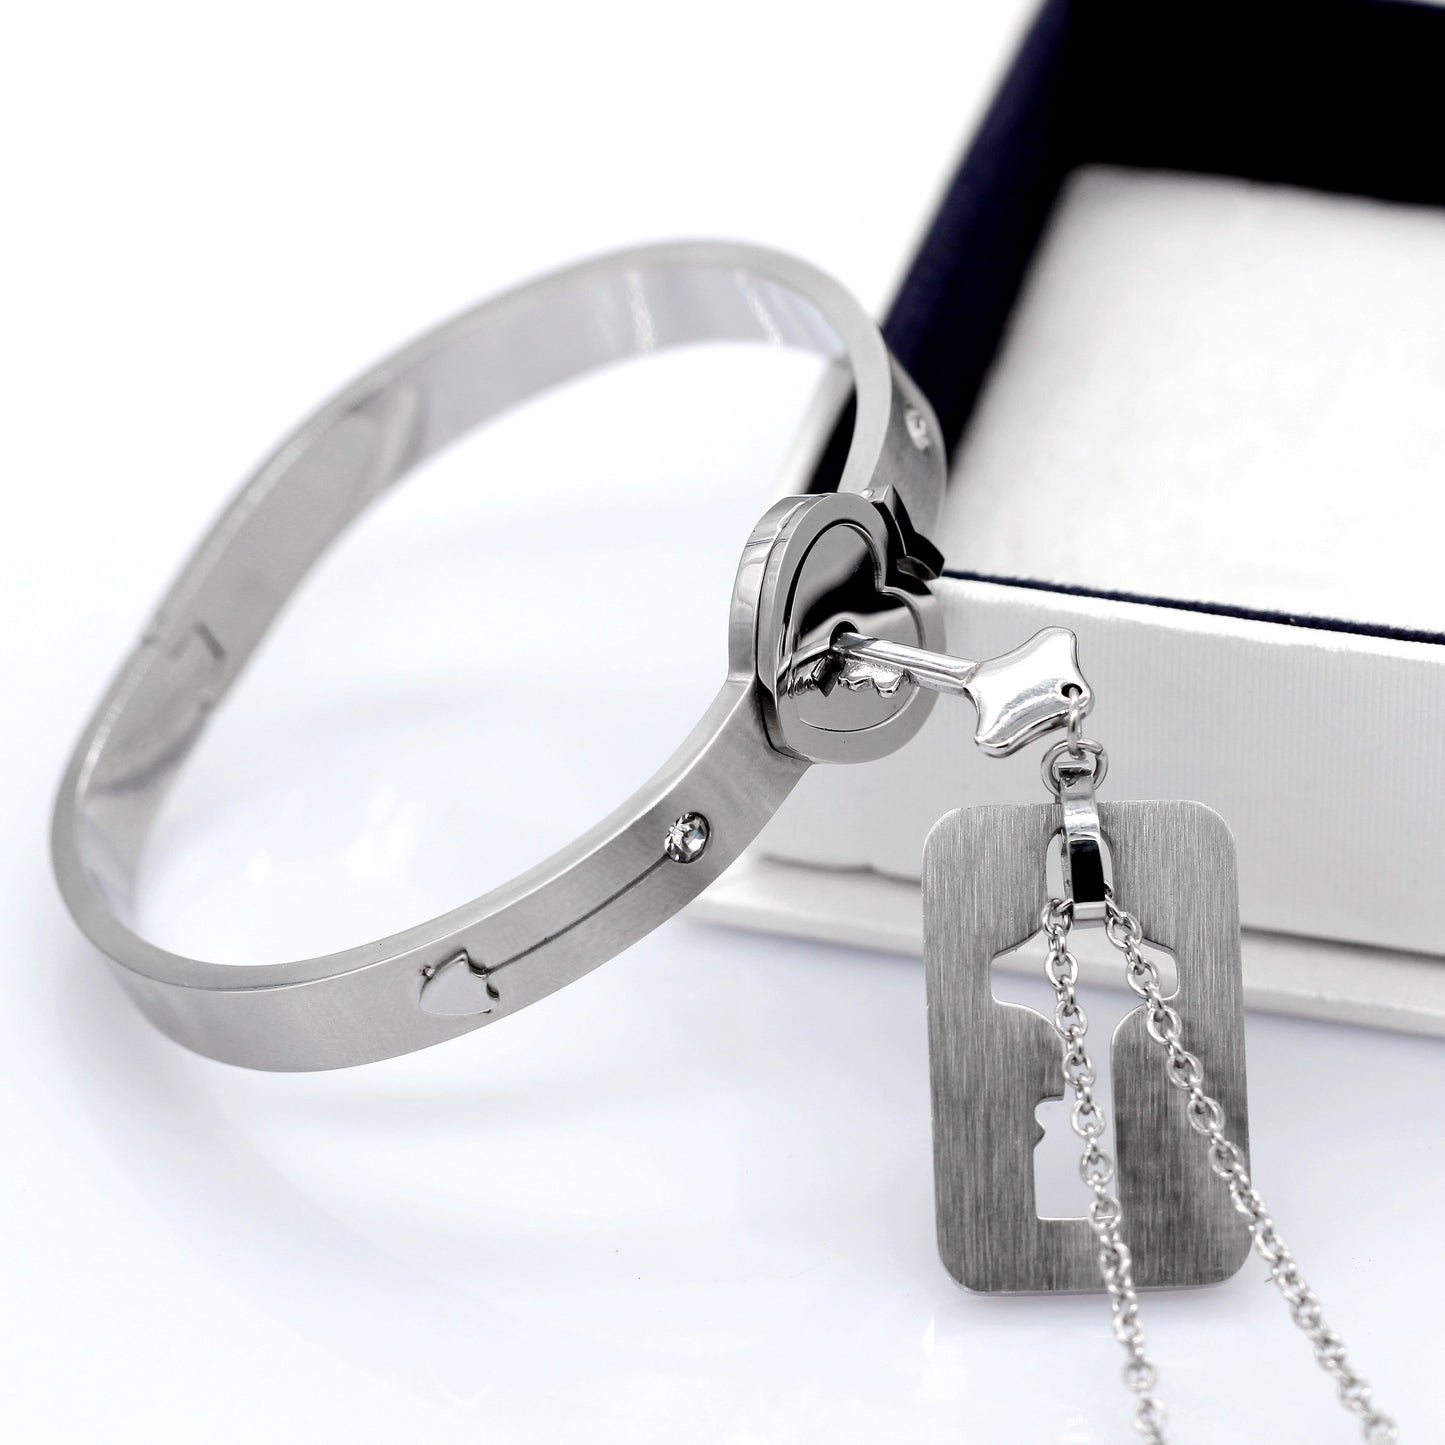 Jewelry Set "You Are The Key To Unlock My Heart" Couple Necklace Bracelet freeshipping - D' Charmz